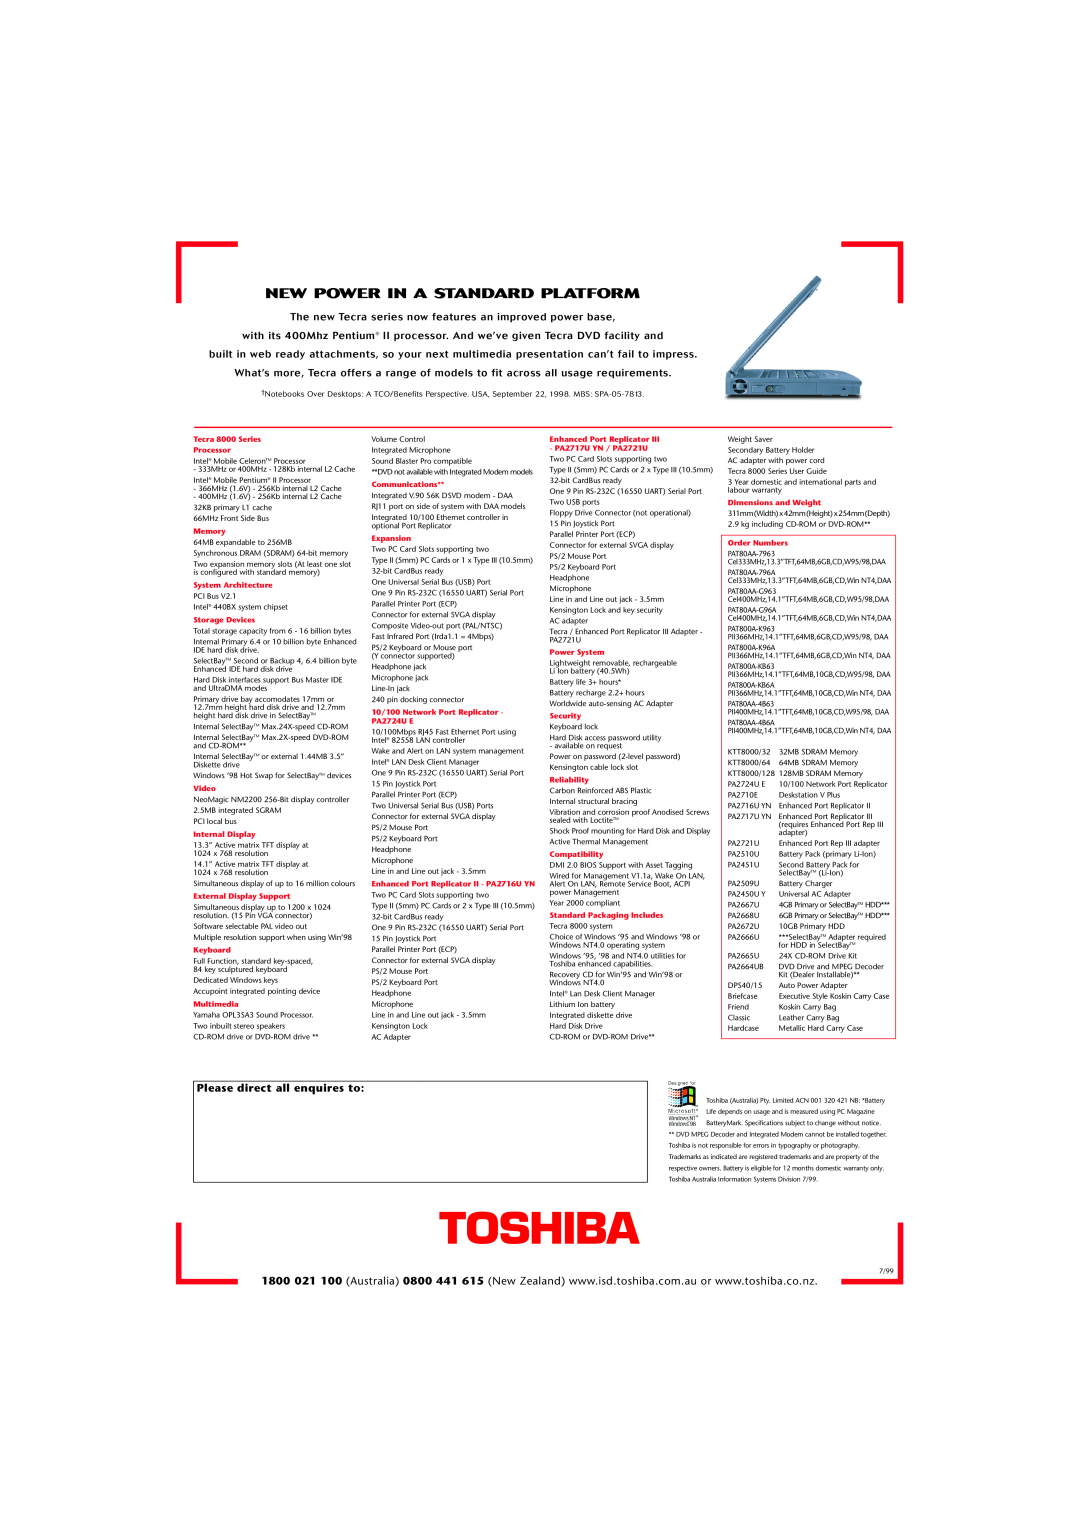 Toshiba 8000 warranty New Power In A Standard Platform, Please direct all enquires to 